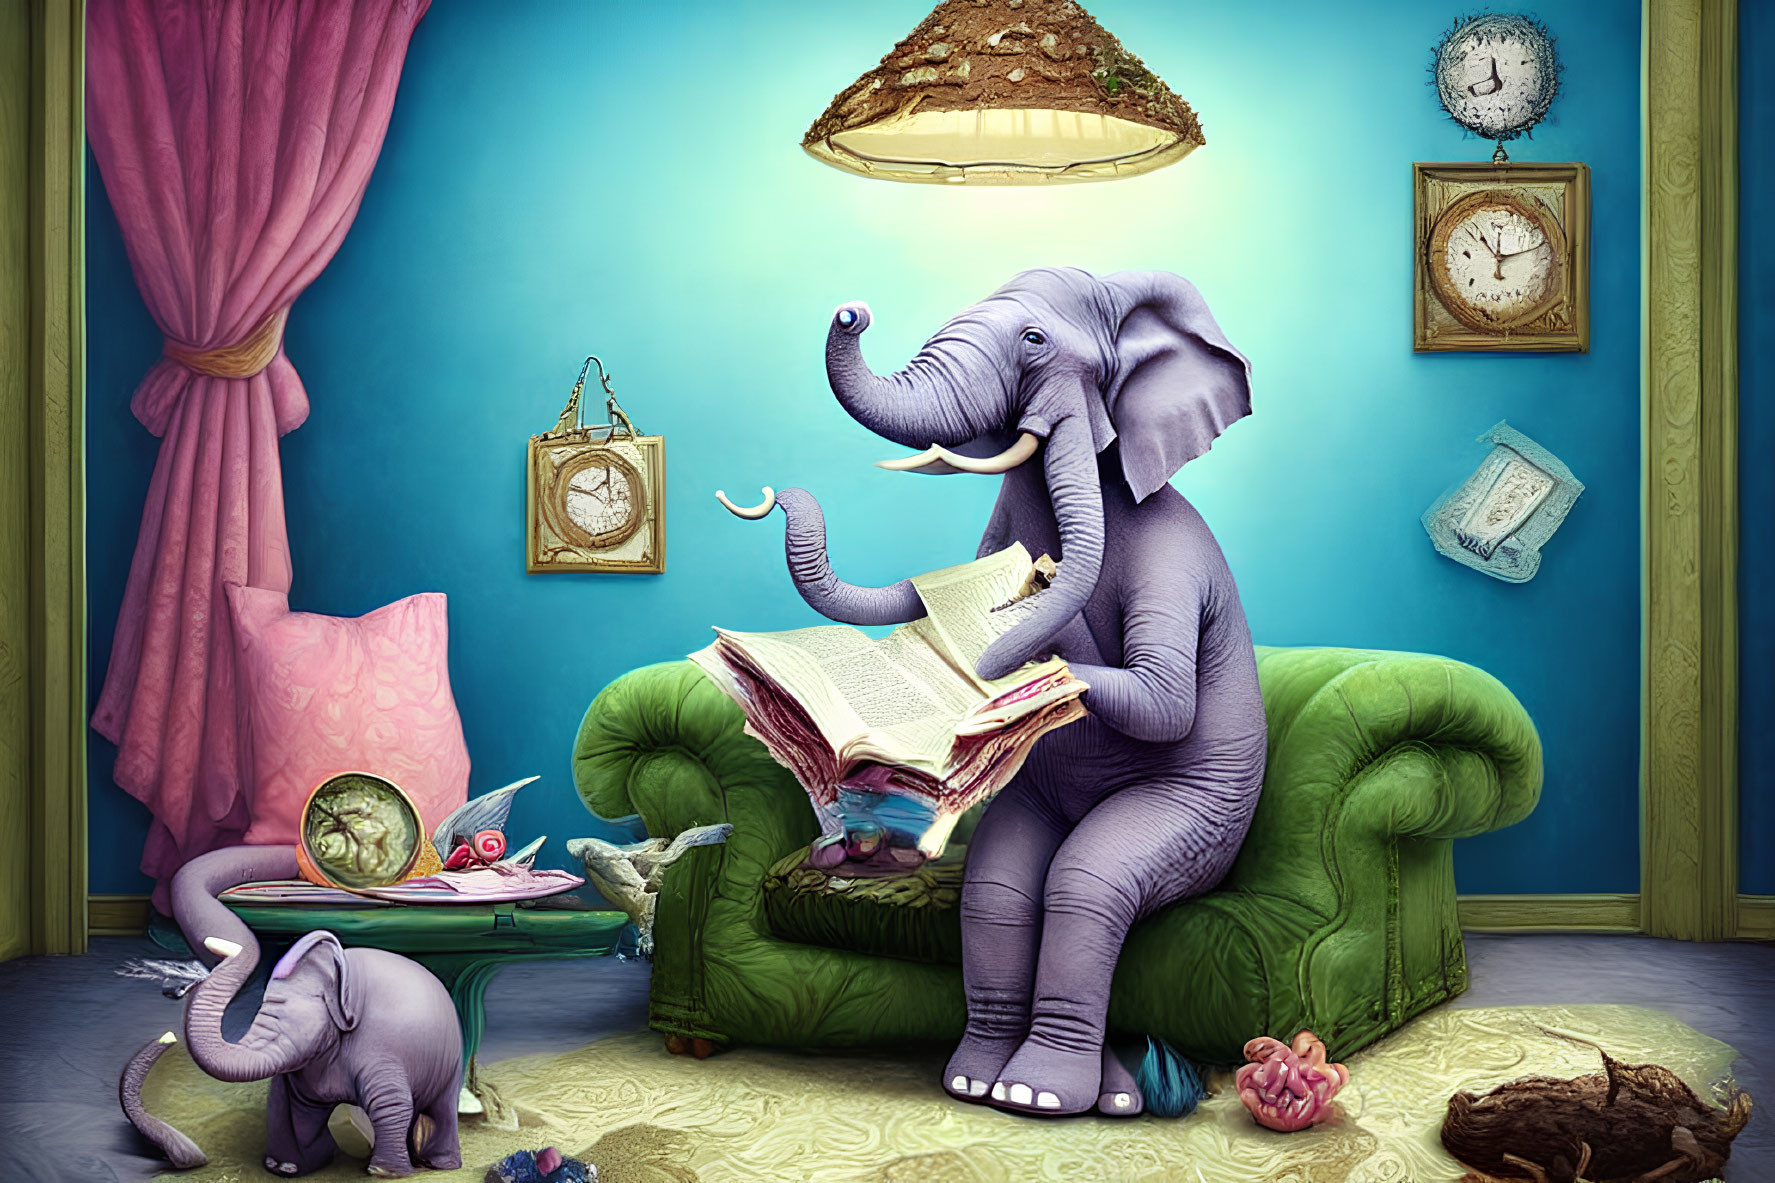 Whimsical anthropomorphic elephant reading with clocks and cat